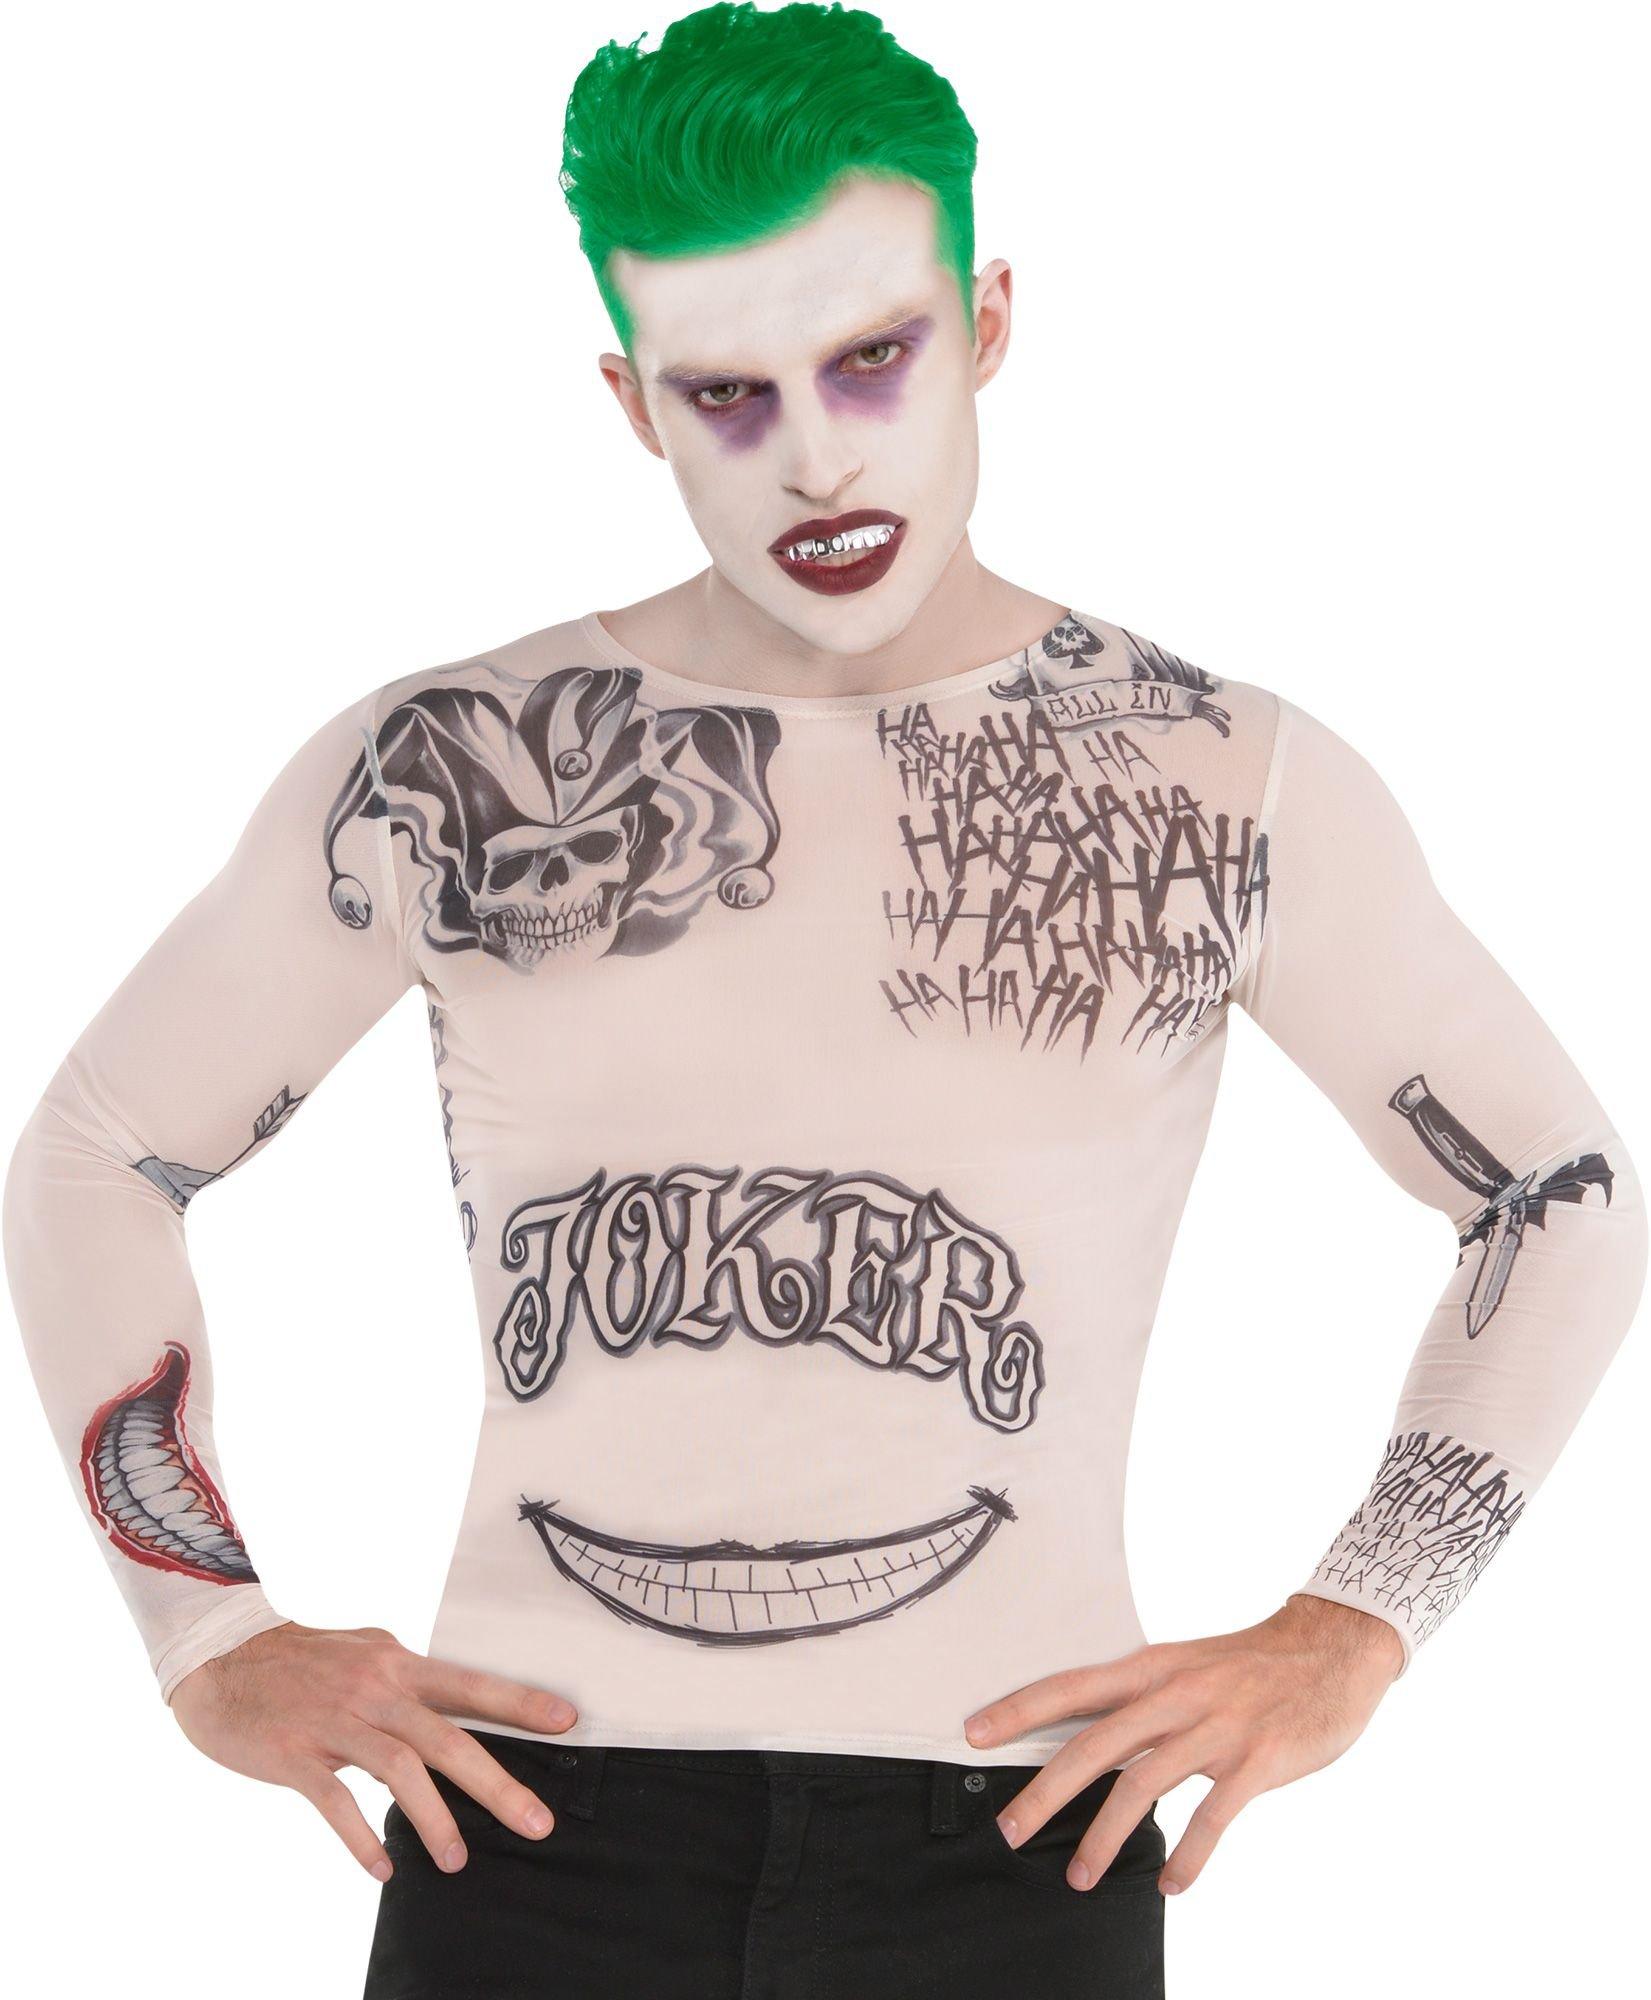 Suicide Squad Joker & Harley Quinn Costumes | Party City